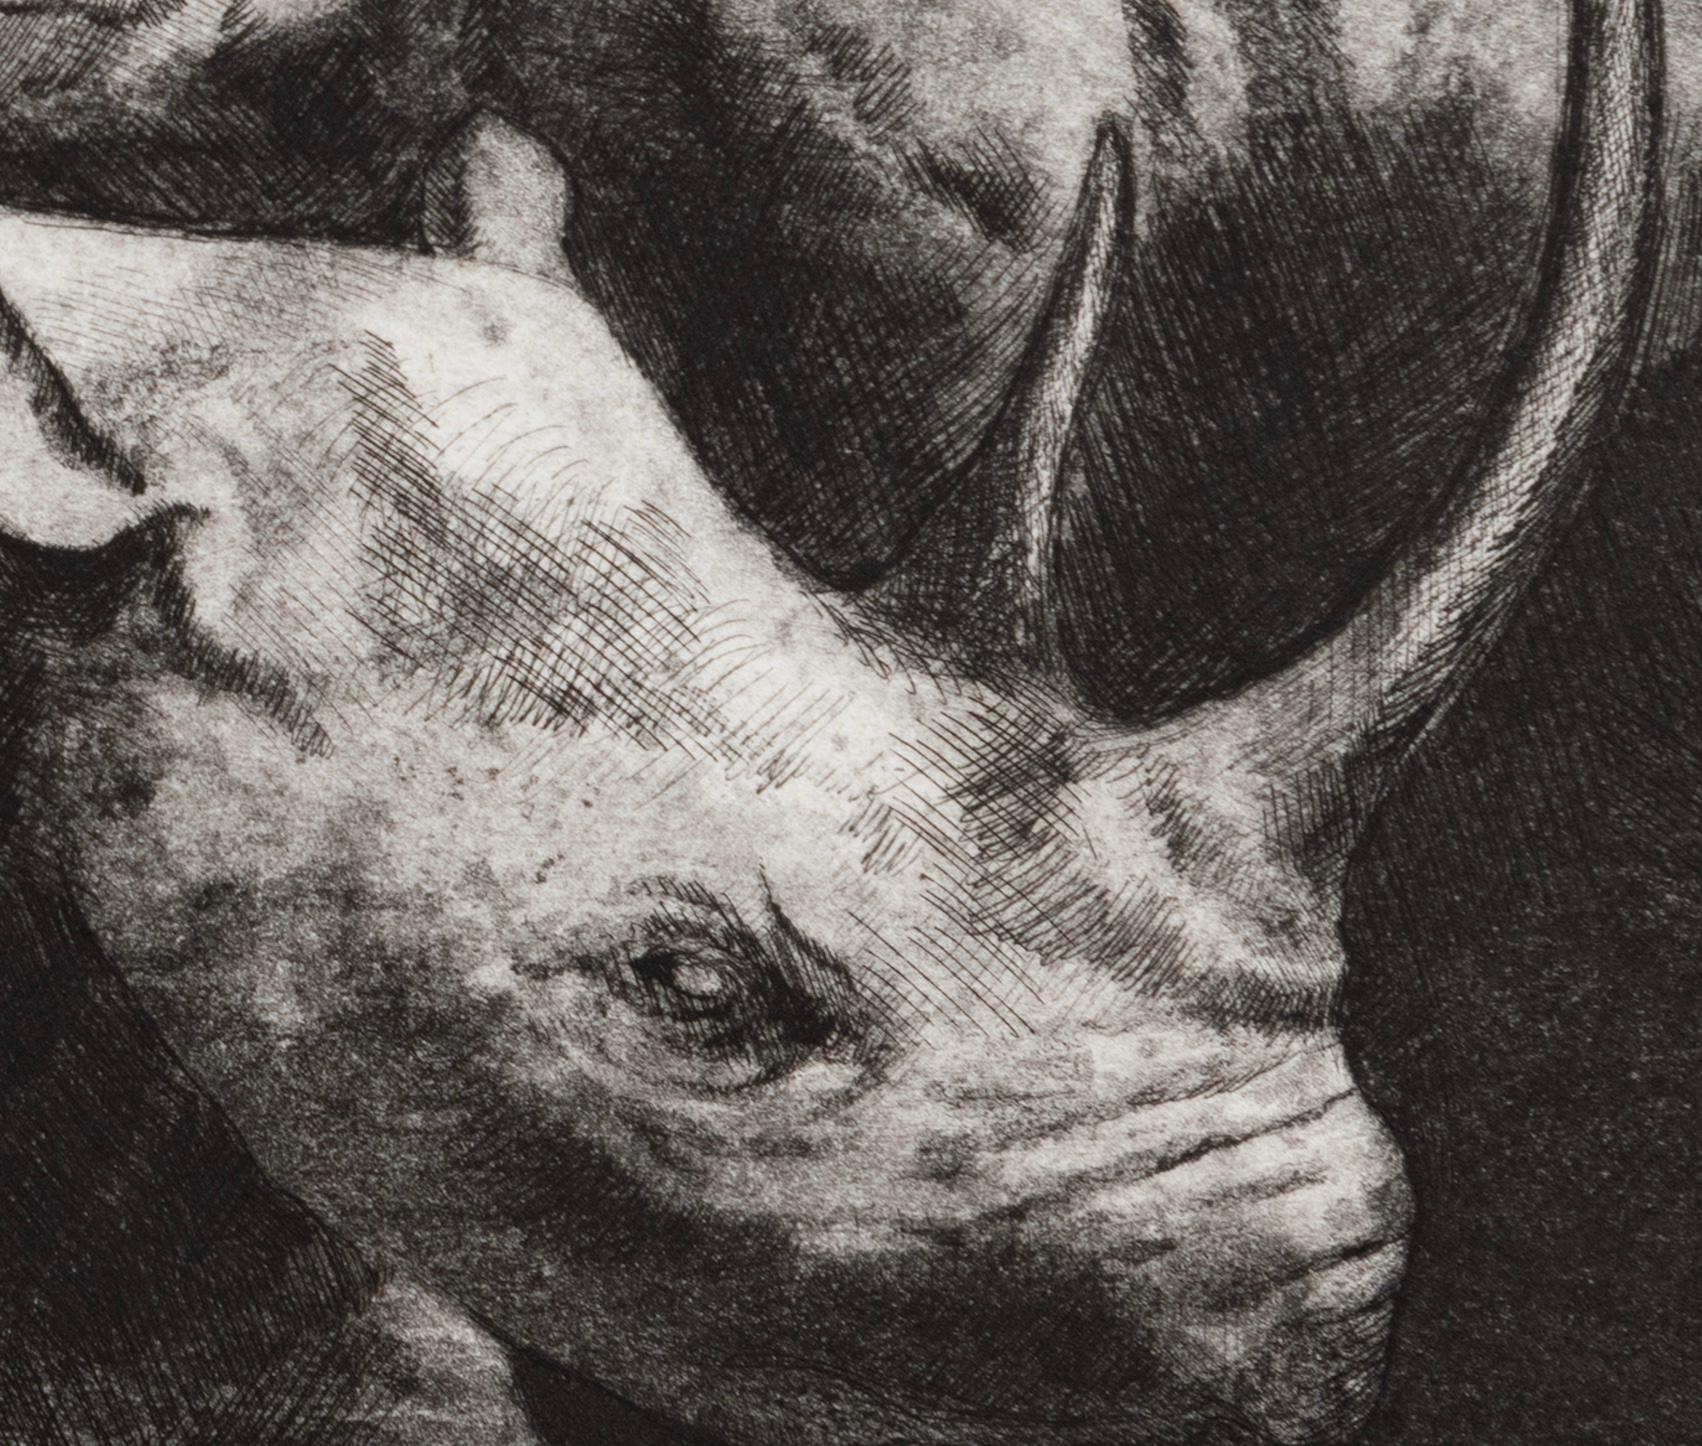 Rhino and Antelope-A : etching with wild animals - Print by Ronald Katz